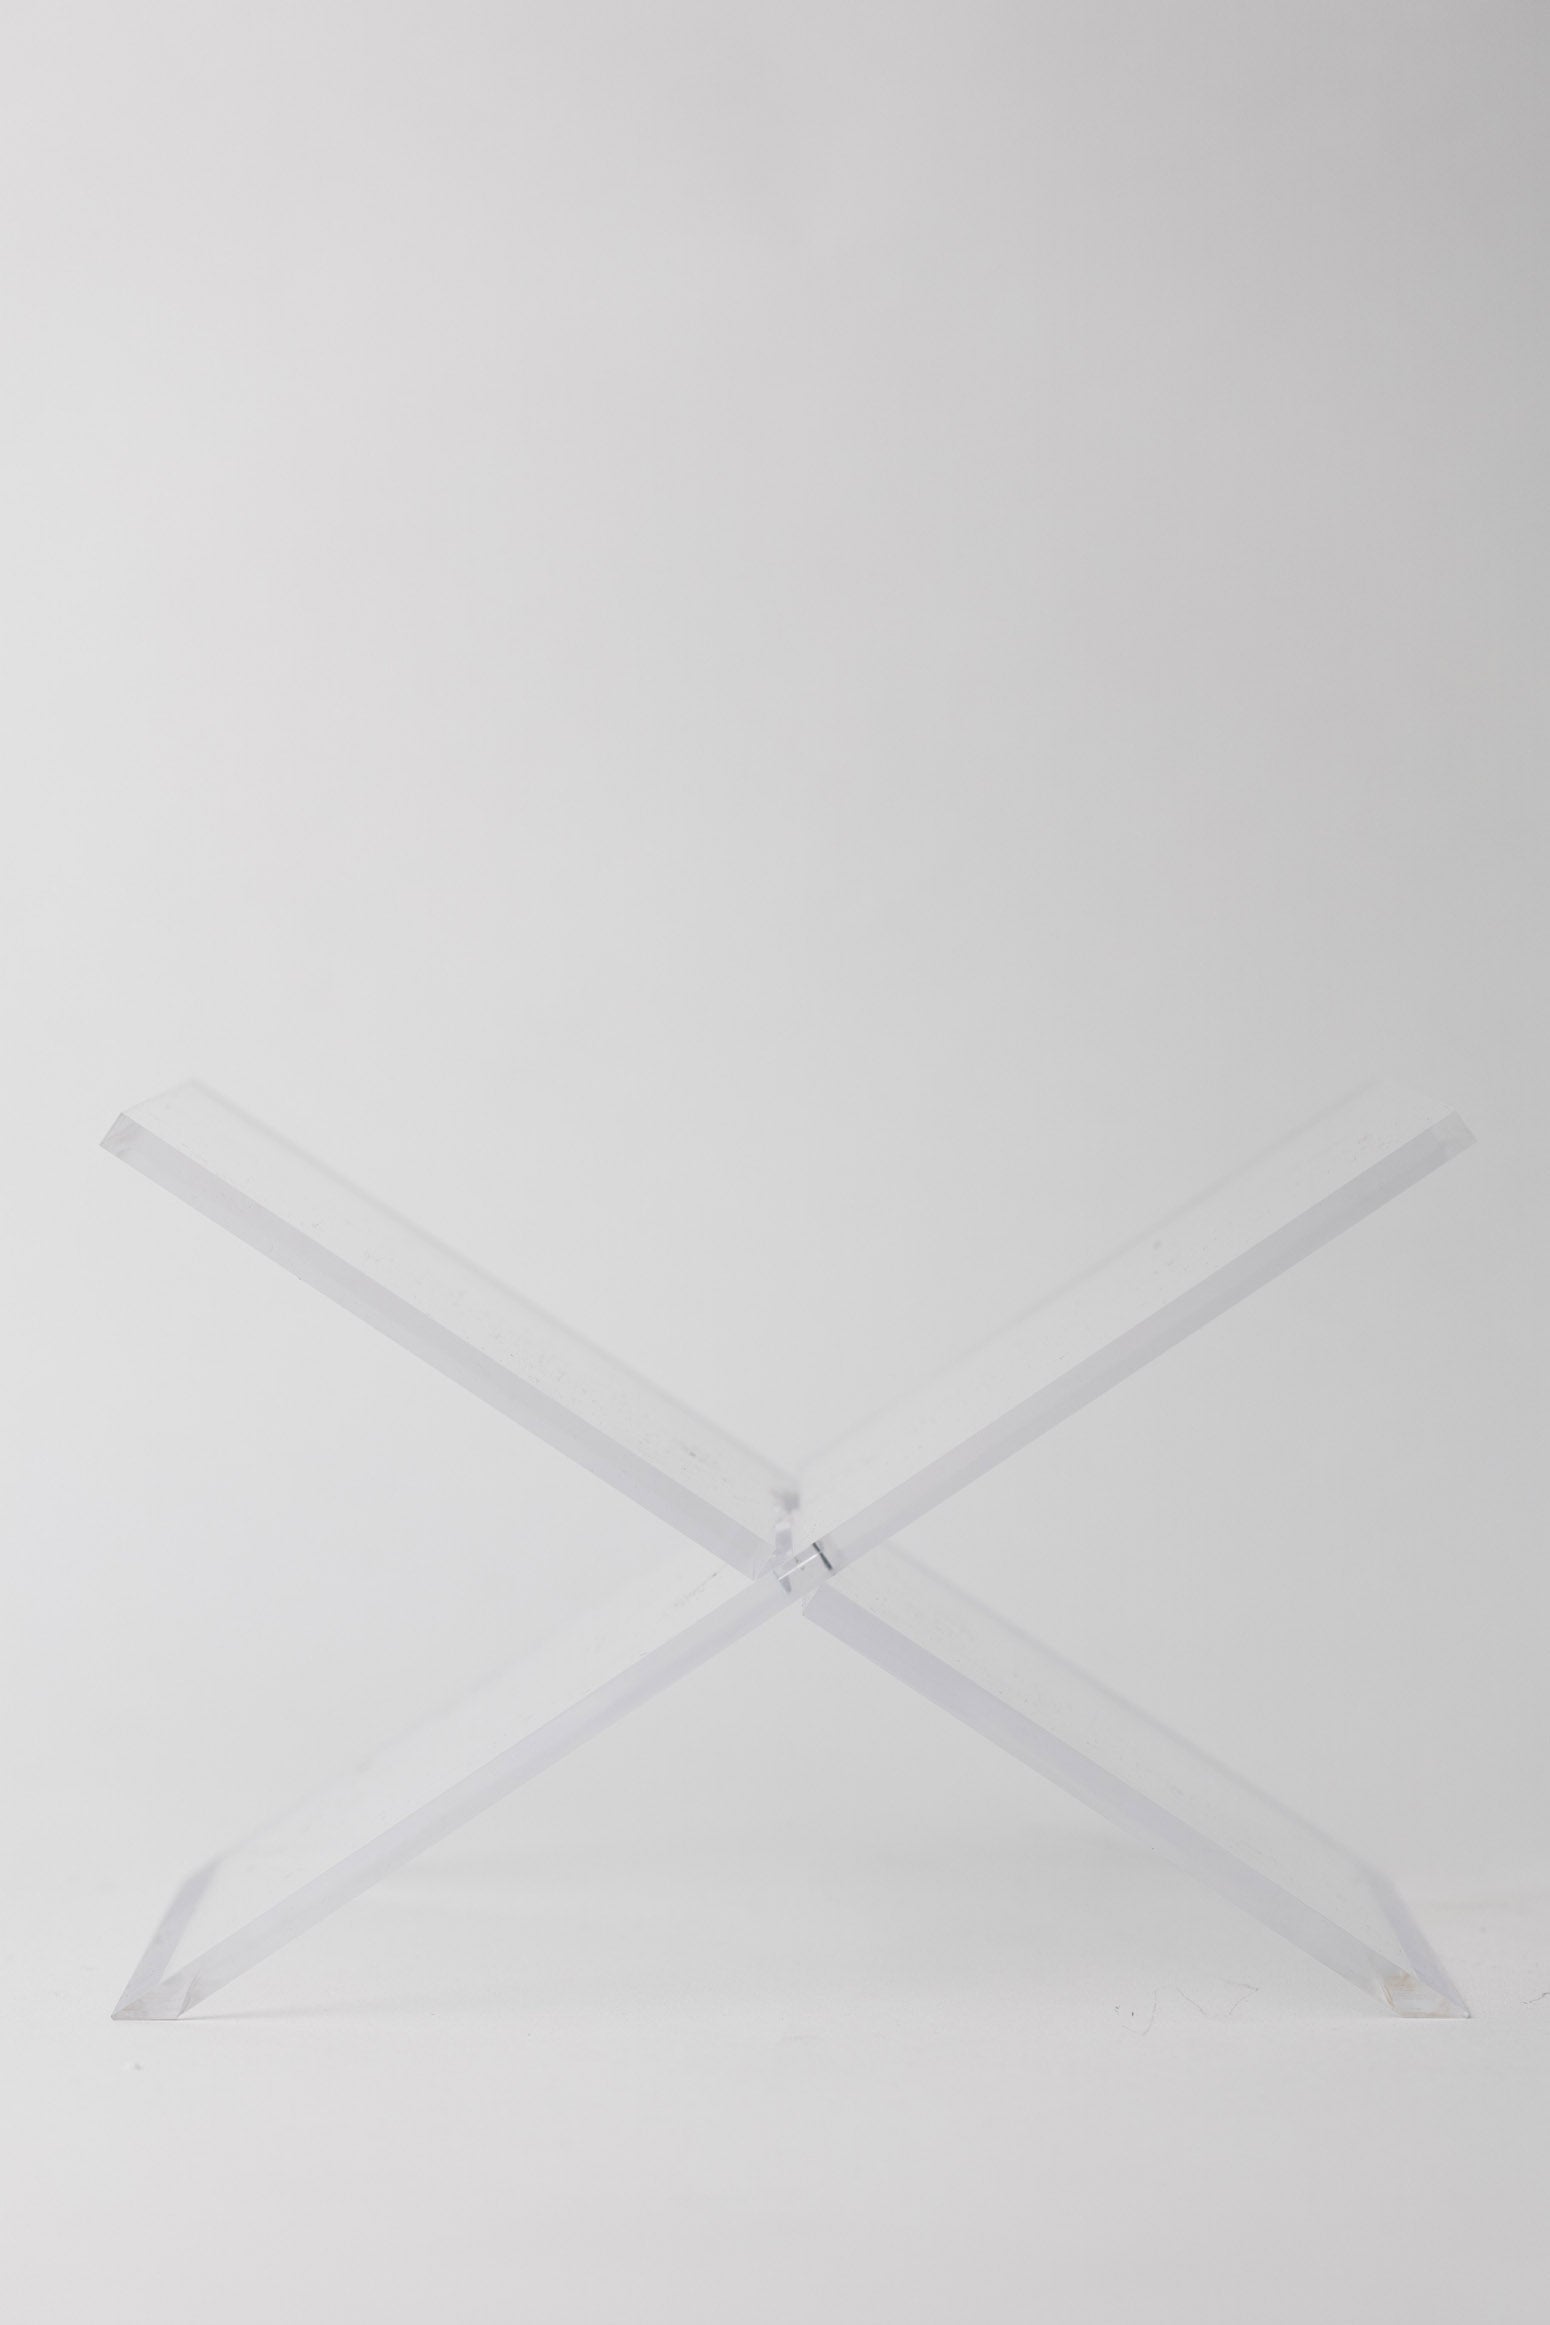 Roth Acrylic Book Stand